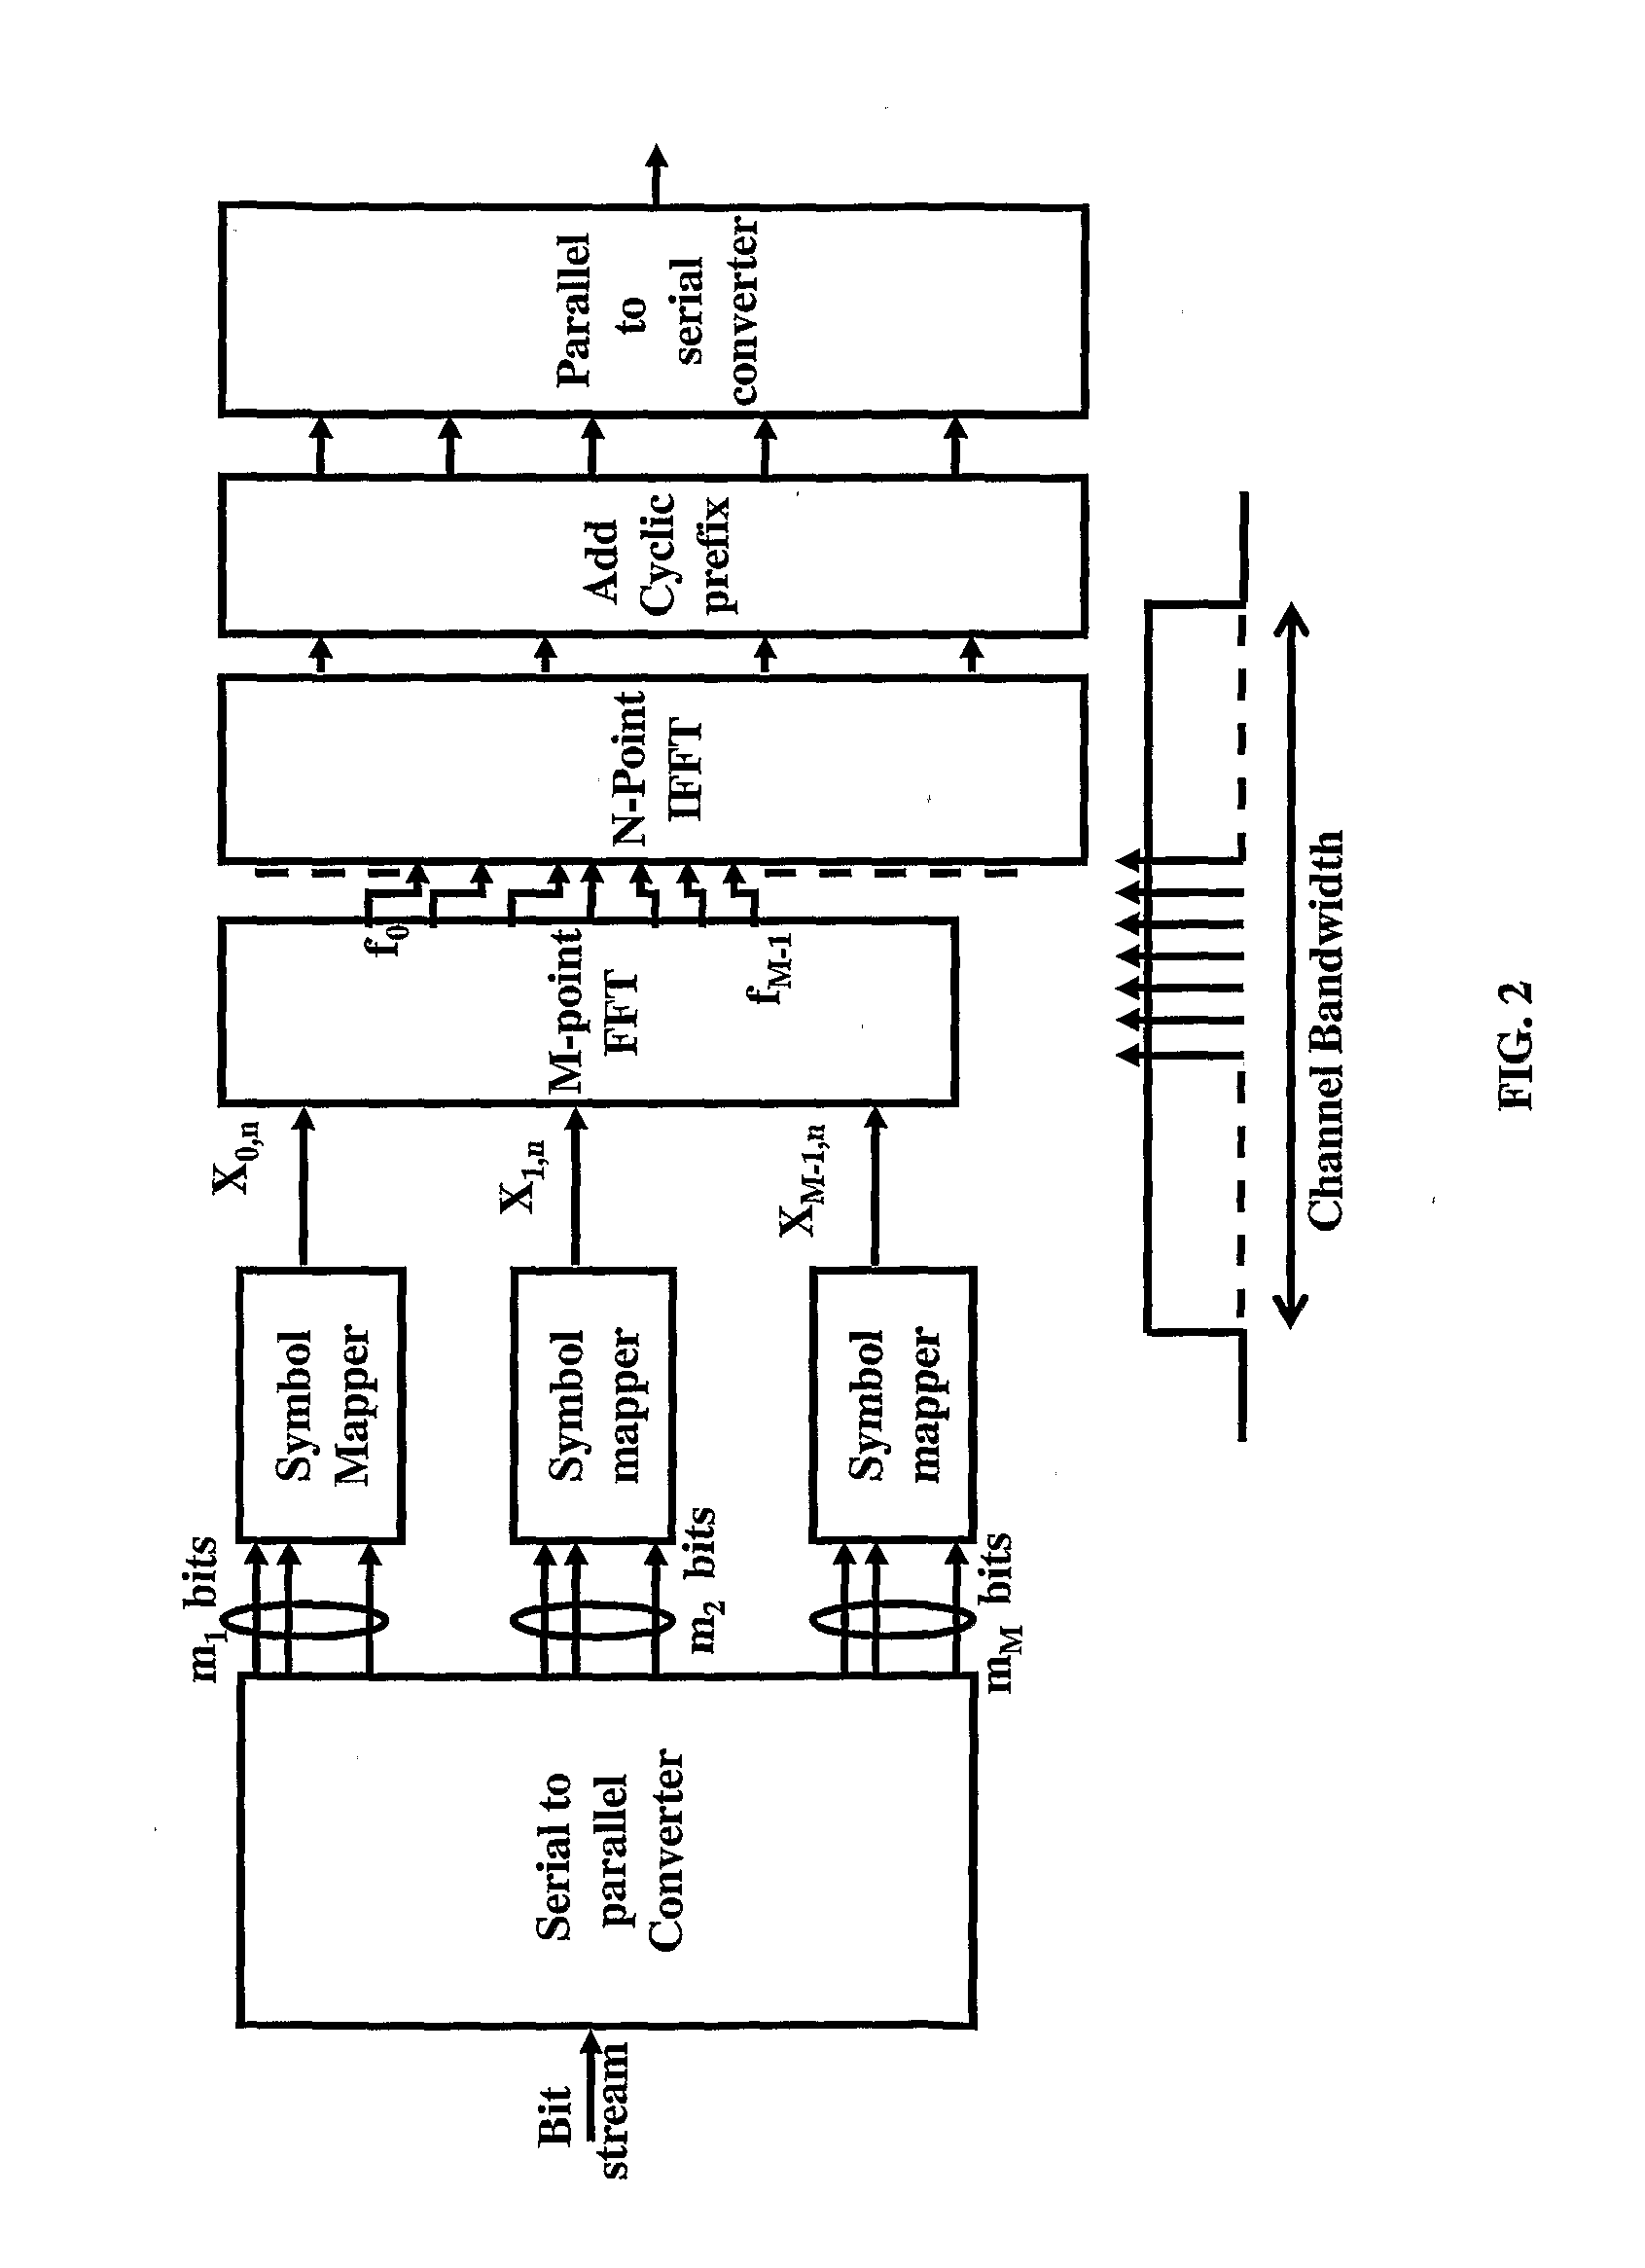 Precoding for Multiple Transmission Streams in Multiple Antenna Systems